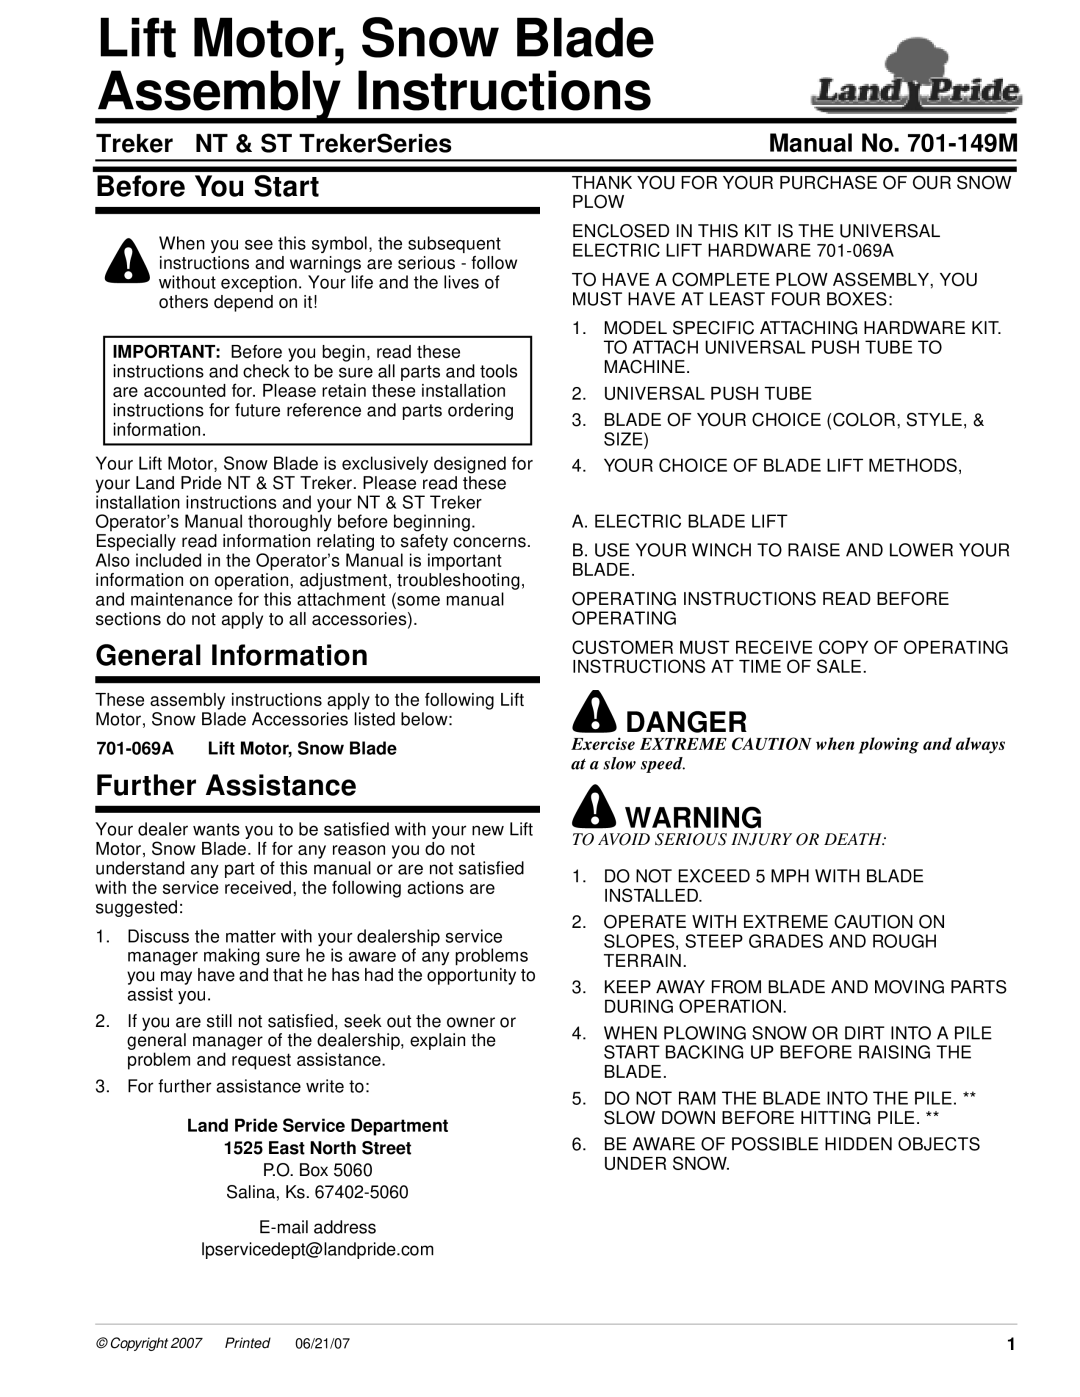 Land Pride ST Series, 701-069A installation instructions Before You Start, General Information, Danger, Further Assistance 